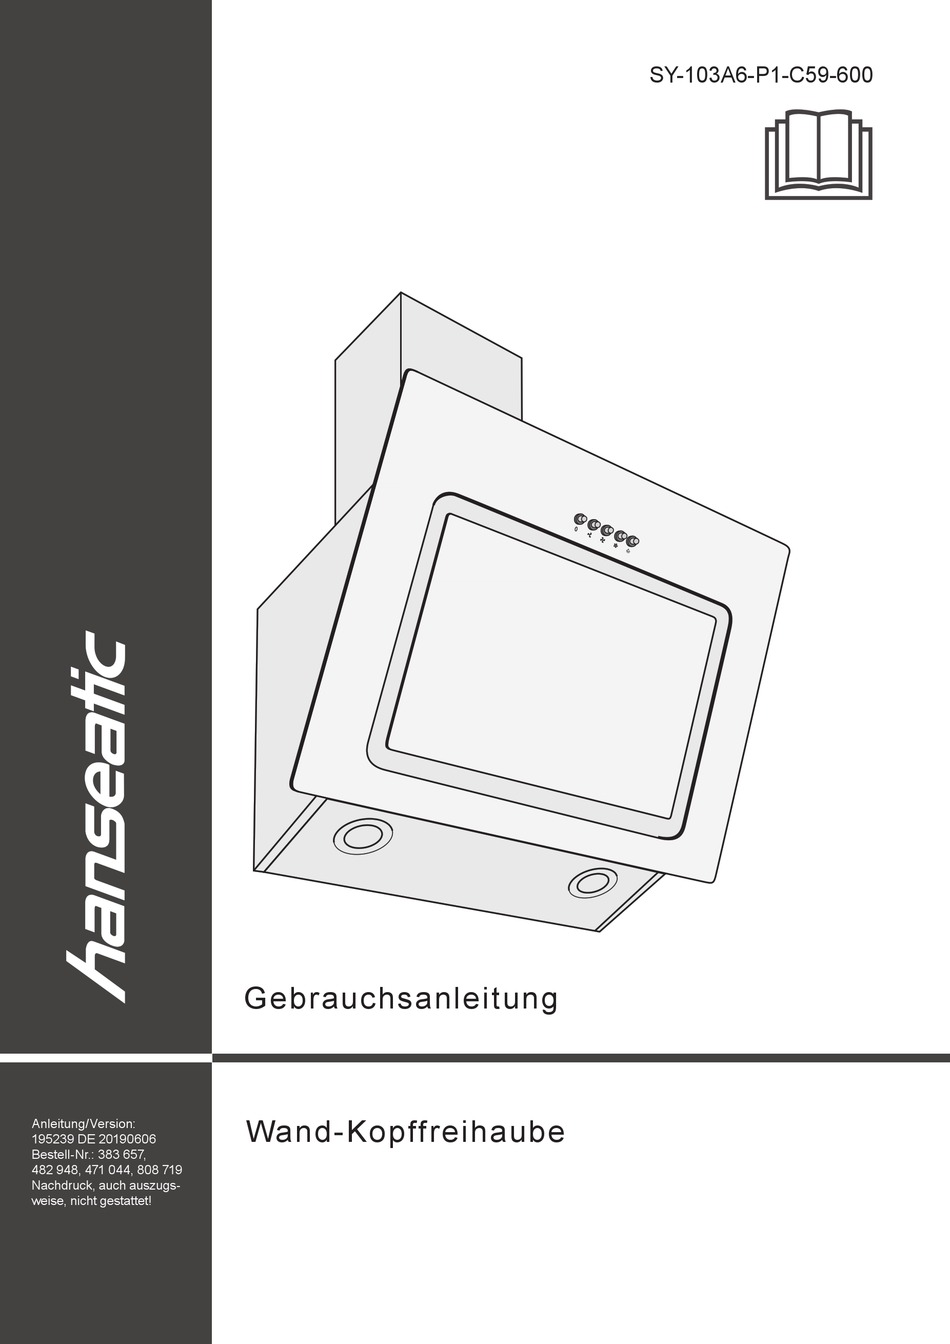 Final Steps - Hanseatic SY-103A6-P1-C59-600 User Manual [Page 43] |  ManualsLib